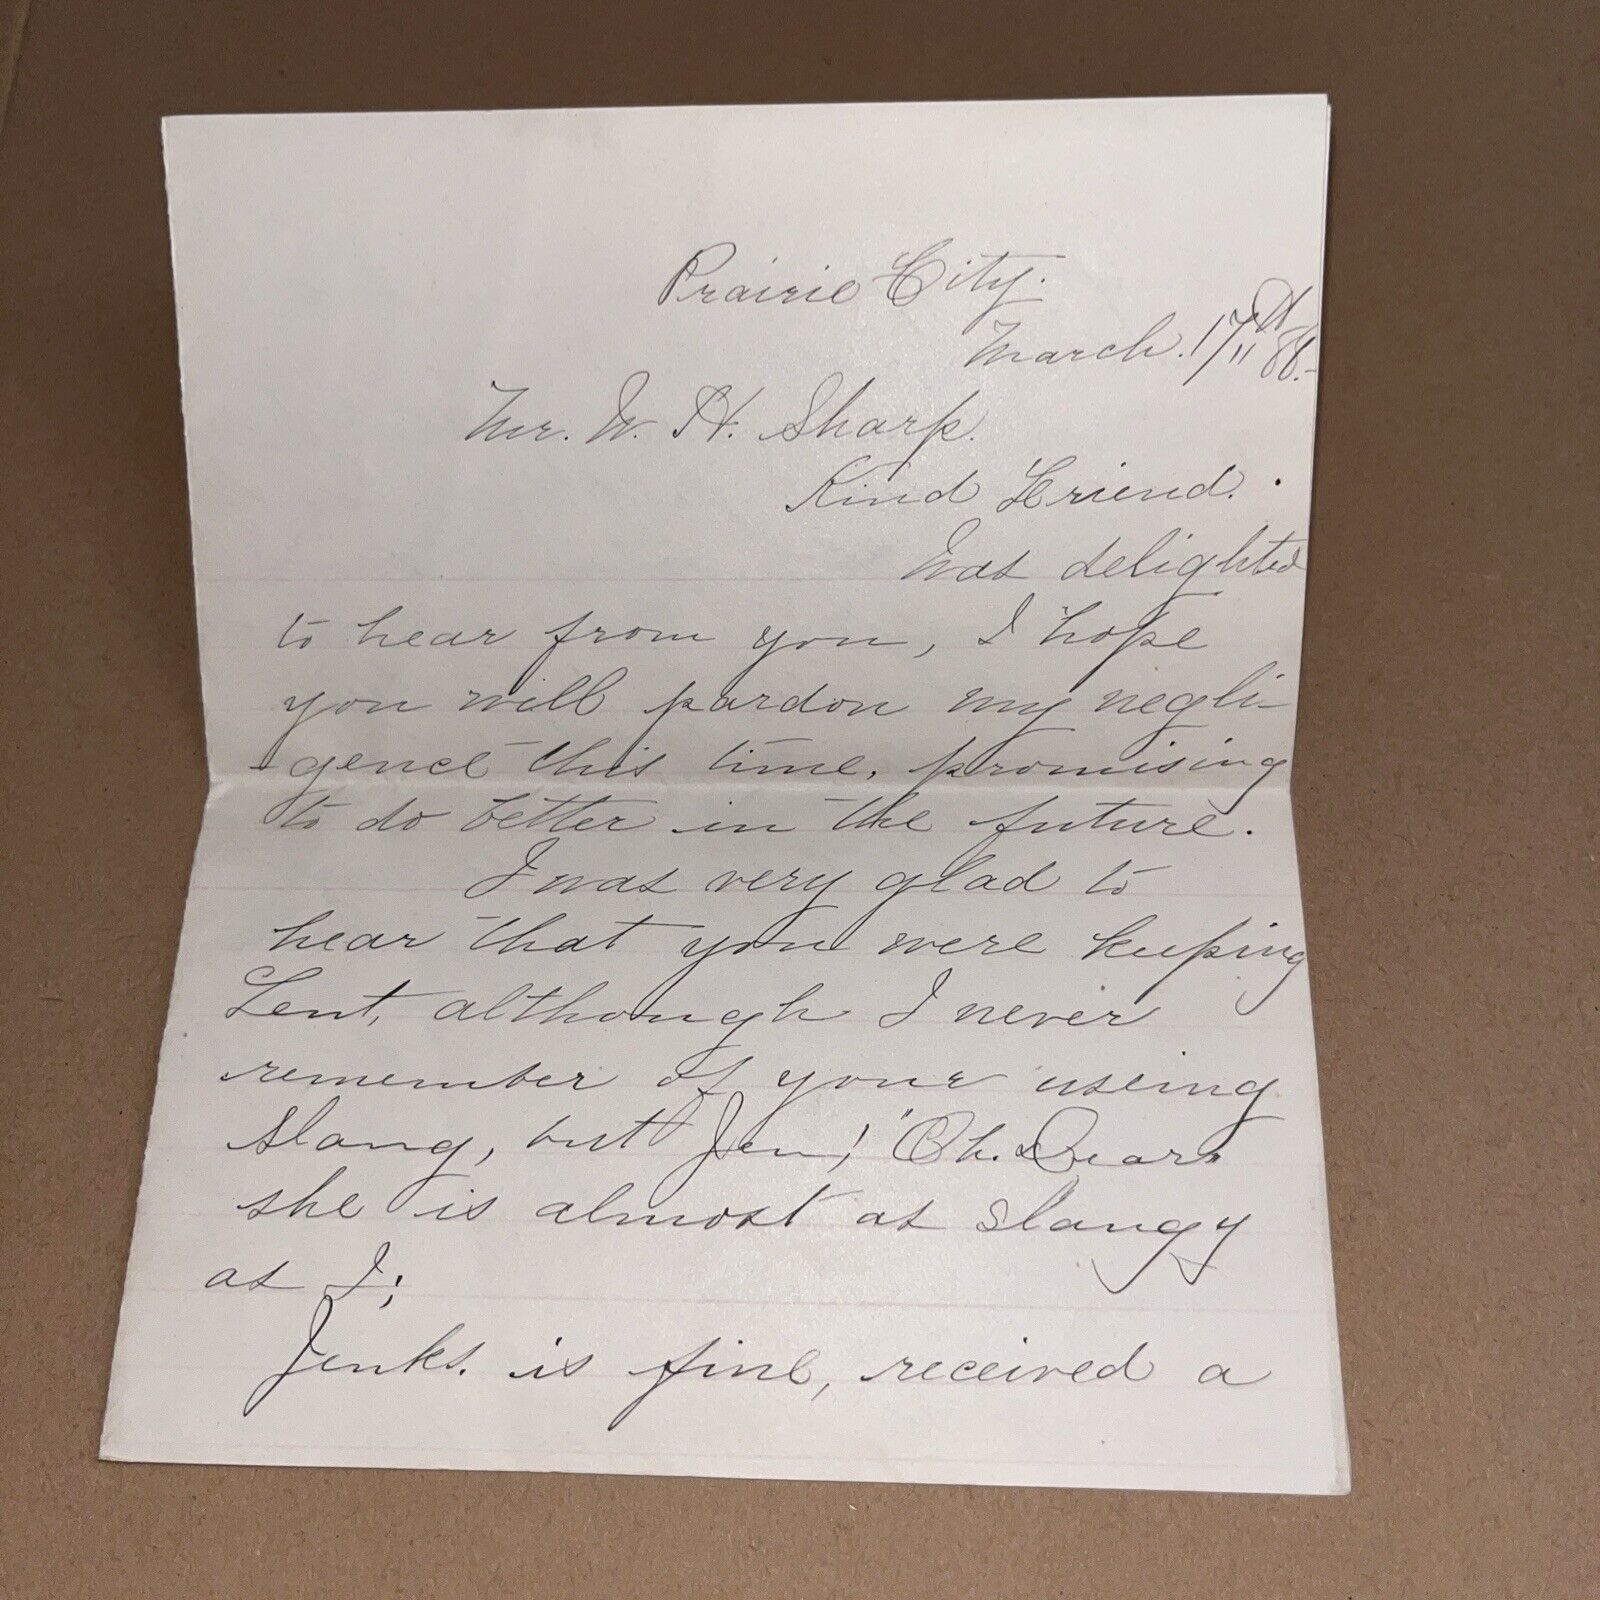 1888 Letter Wishing Political Success to W H Sharp (California Military Academy)